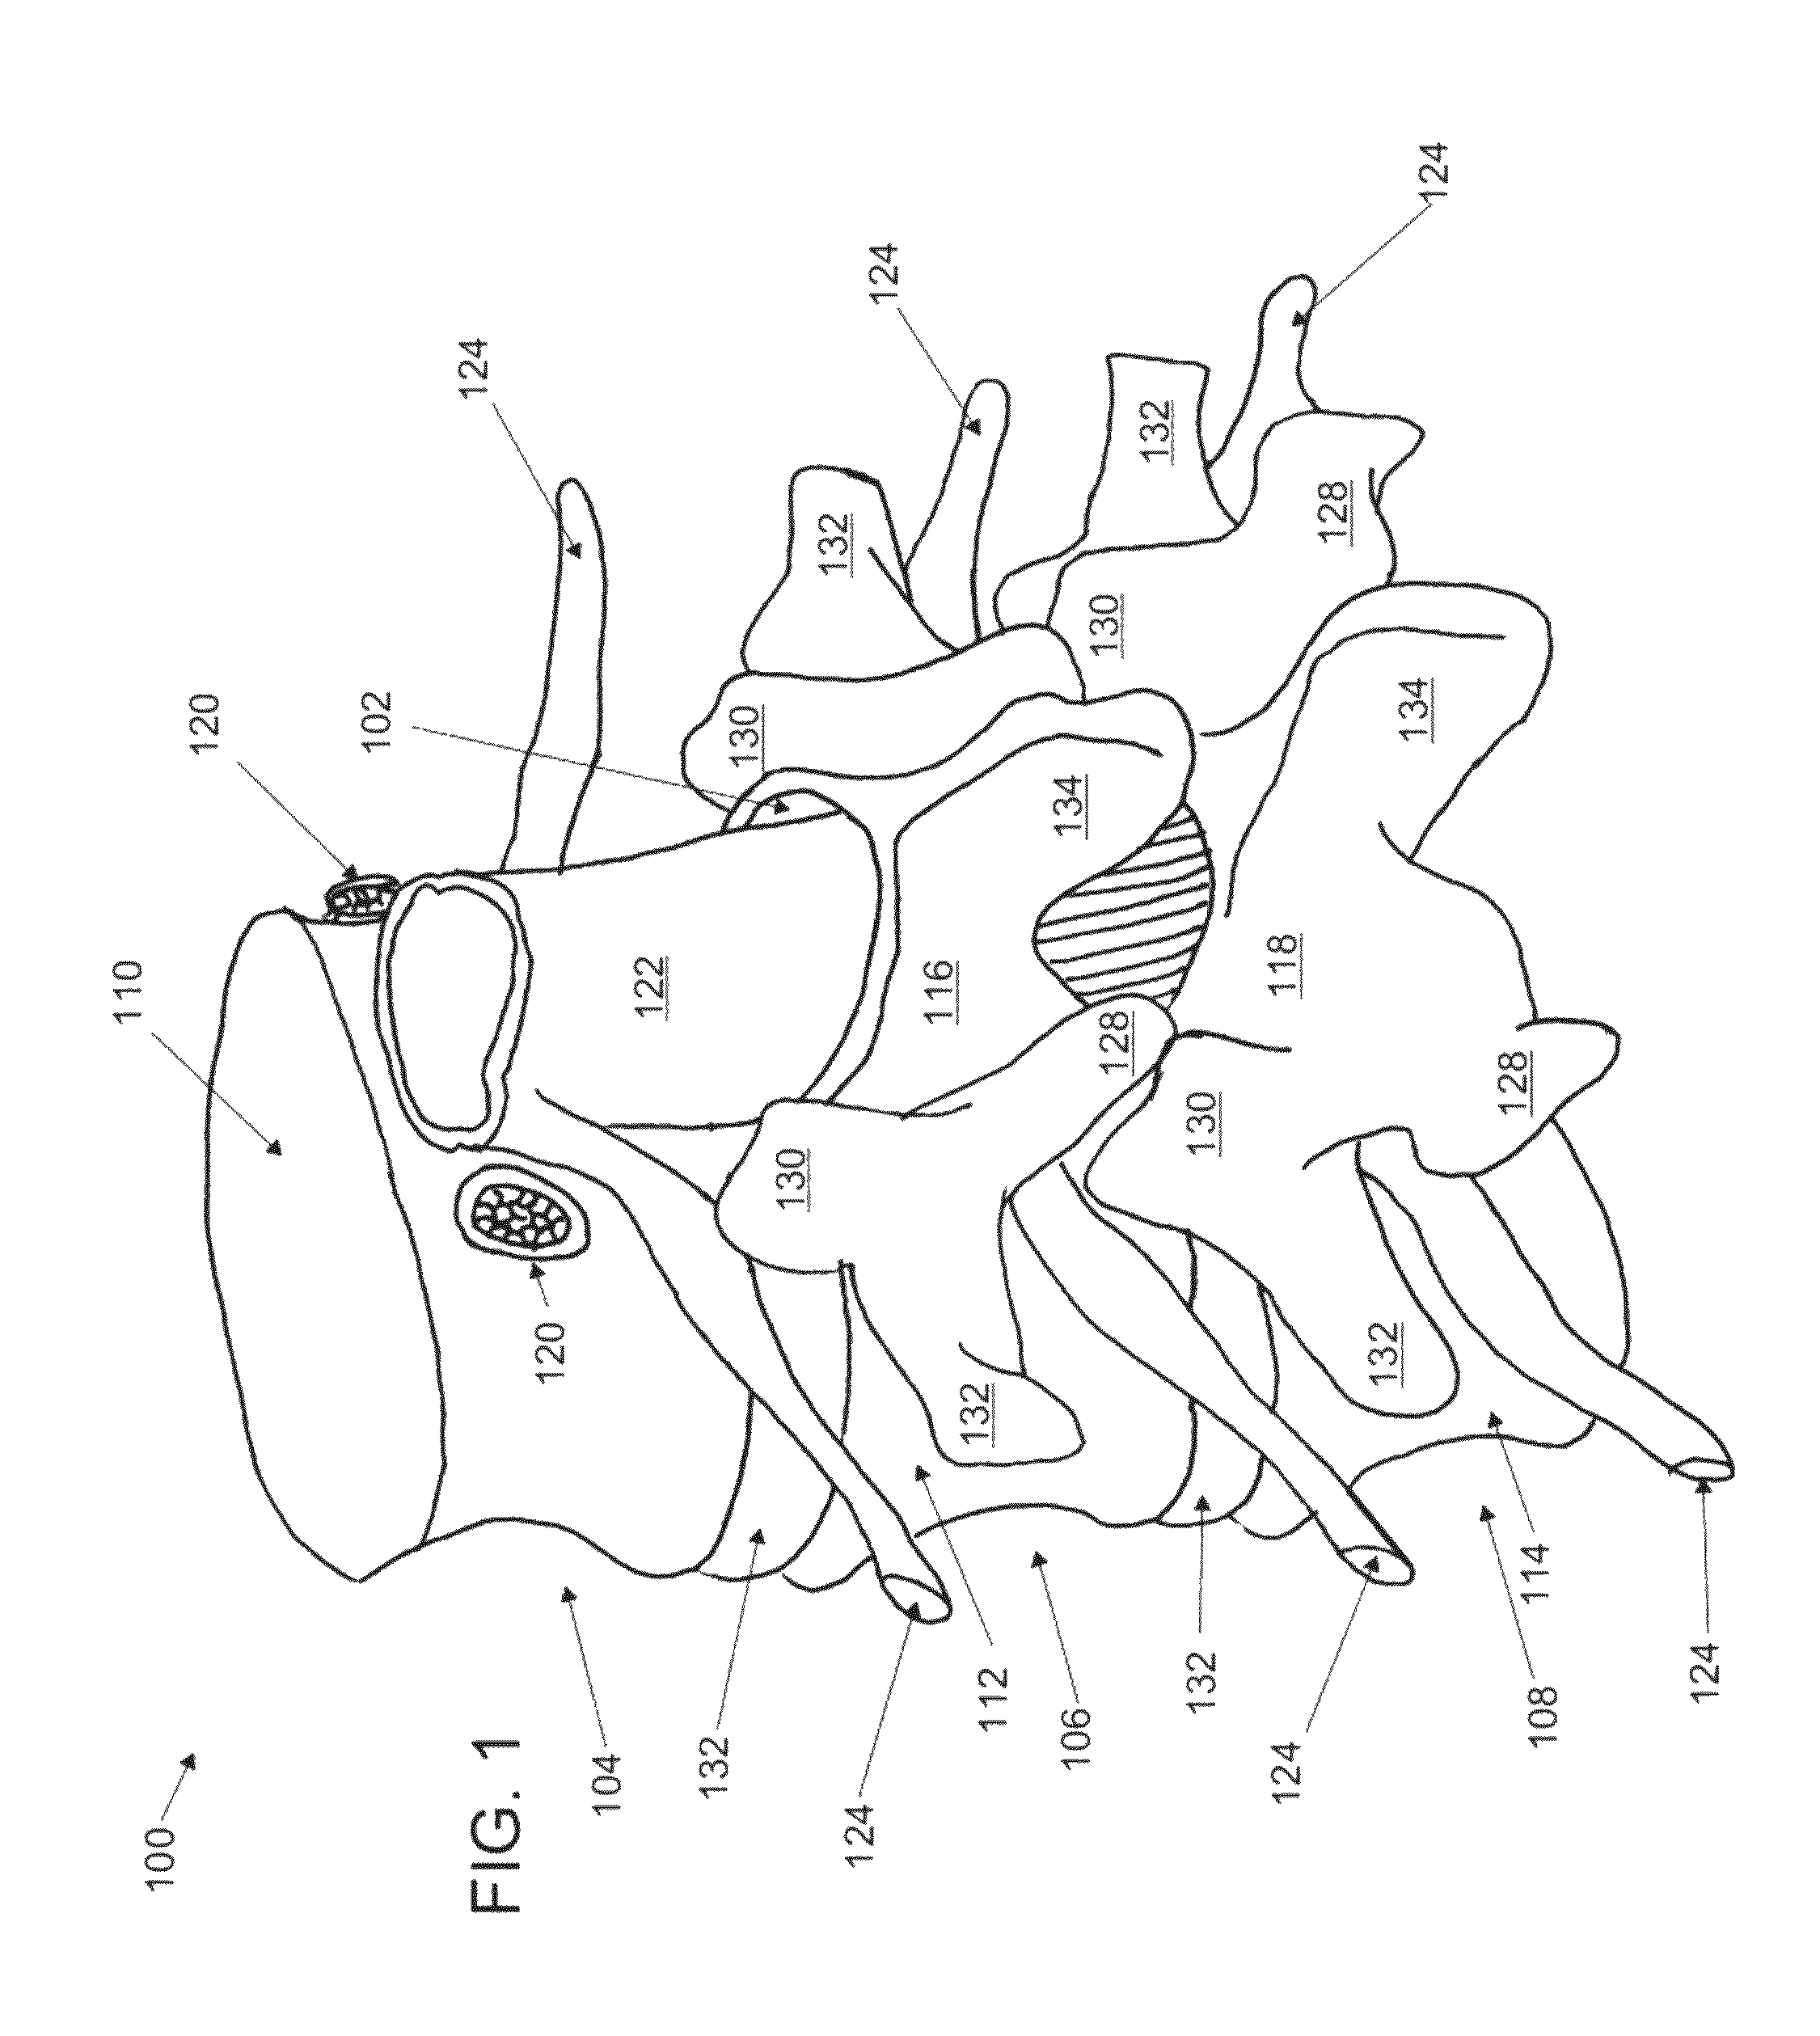 Systems and methods for cable-based tissue removal